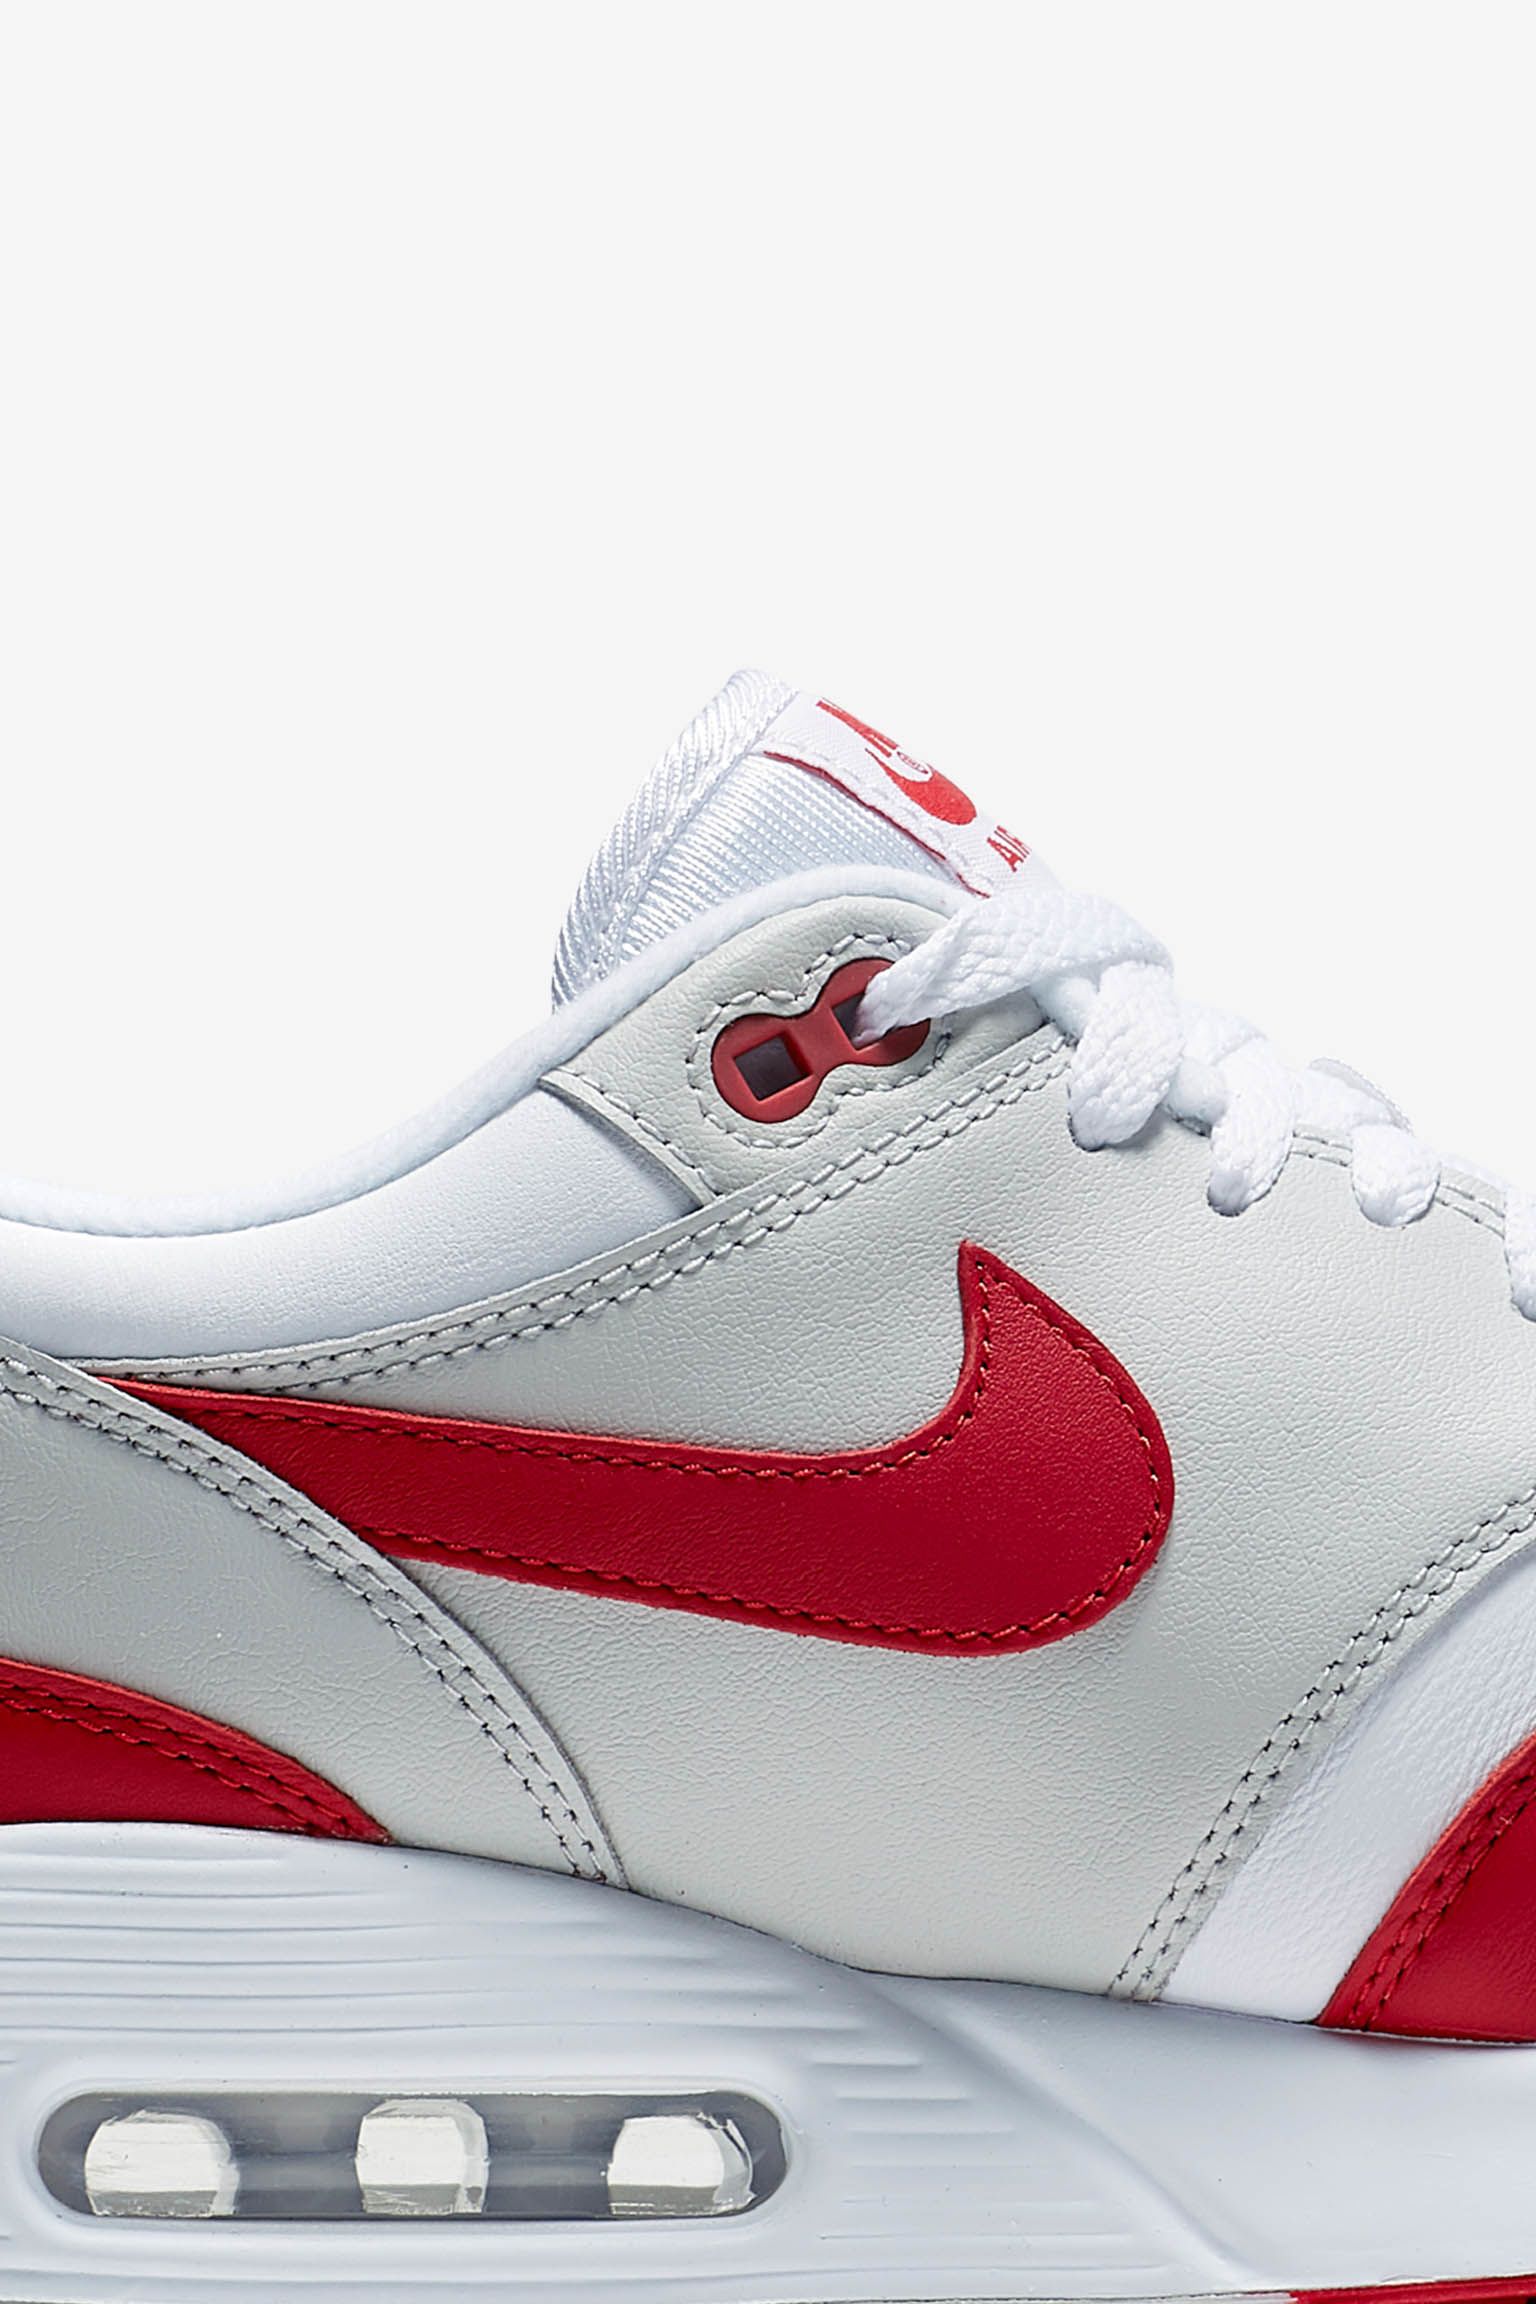 Nike Air Max 90/1 'White & University Red' Release Date. Nike SNKRS كرب